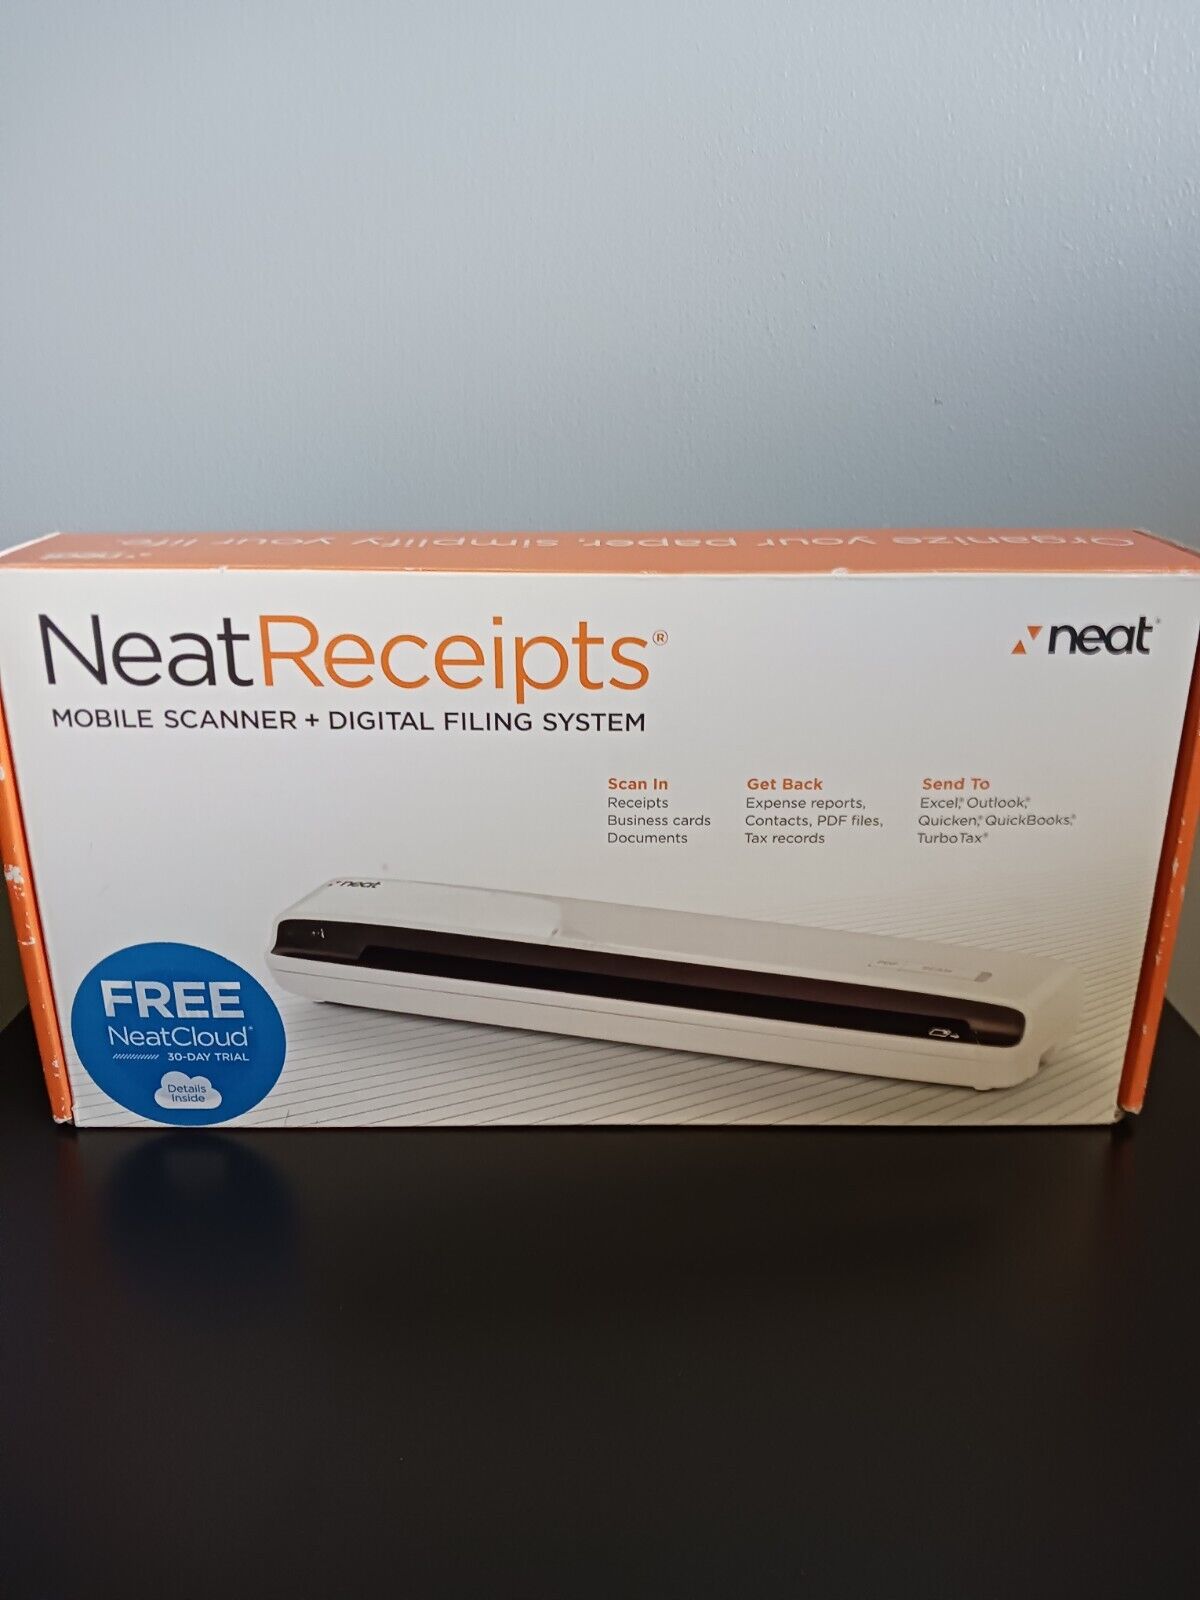 Neat Receipts Mobile Scanner & Digital Filing System New Open Box -NEAT